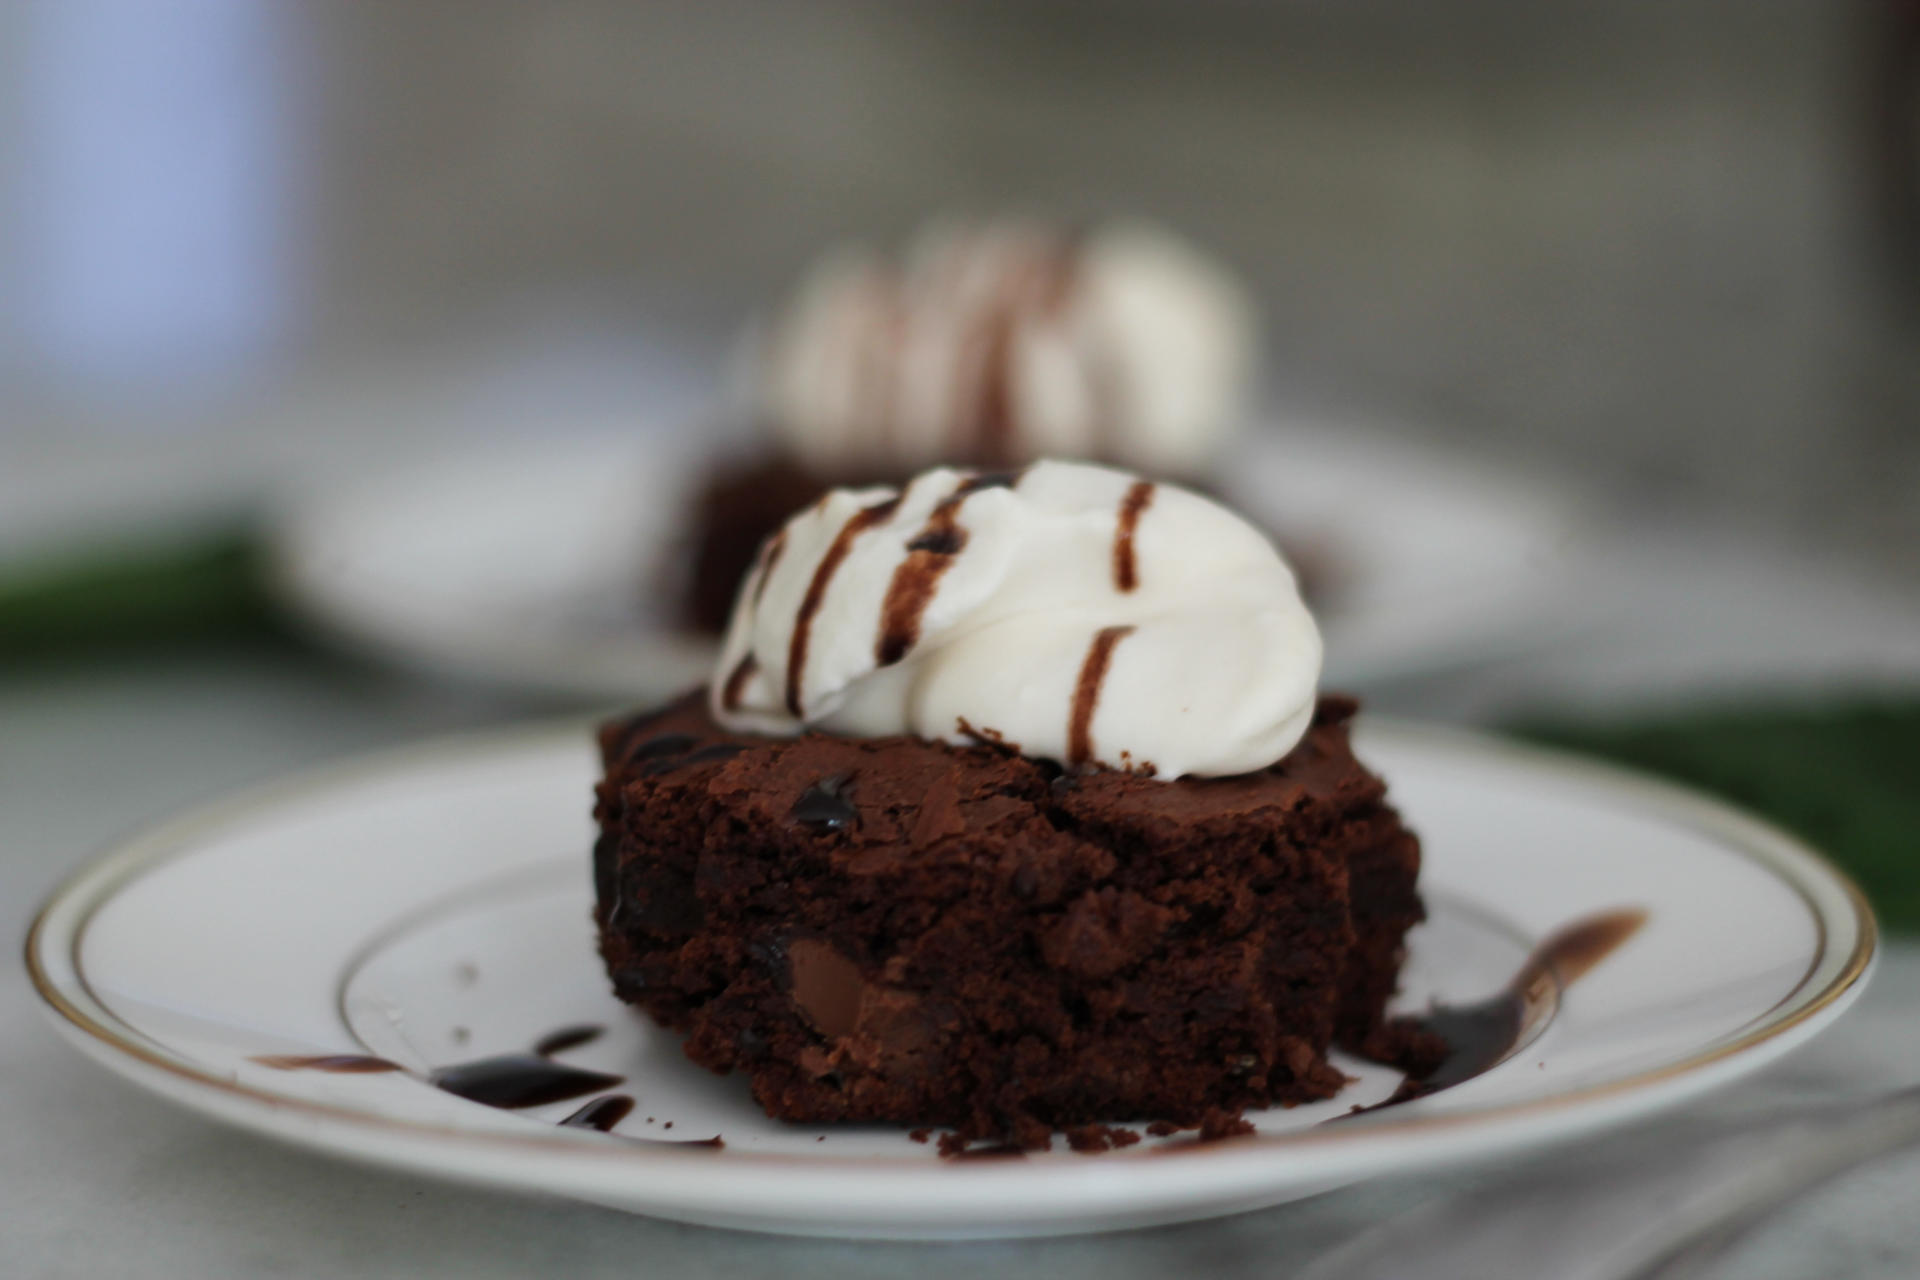 The Barefoot Contessa's Brownie Tart With Salted Caramel Whipped Cream